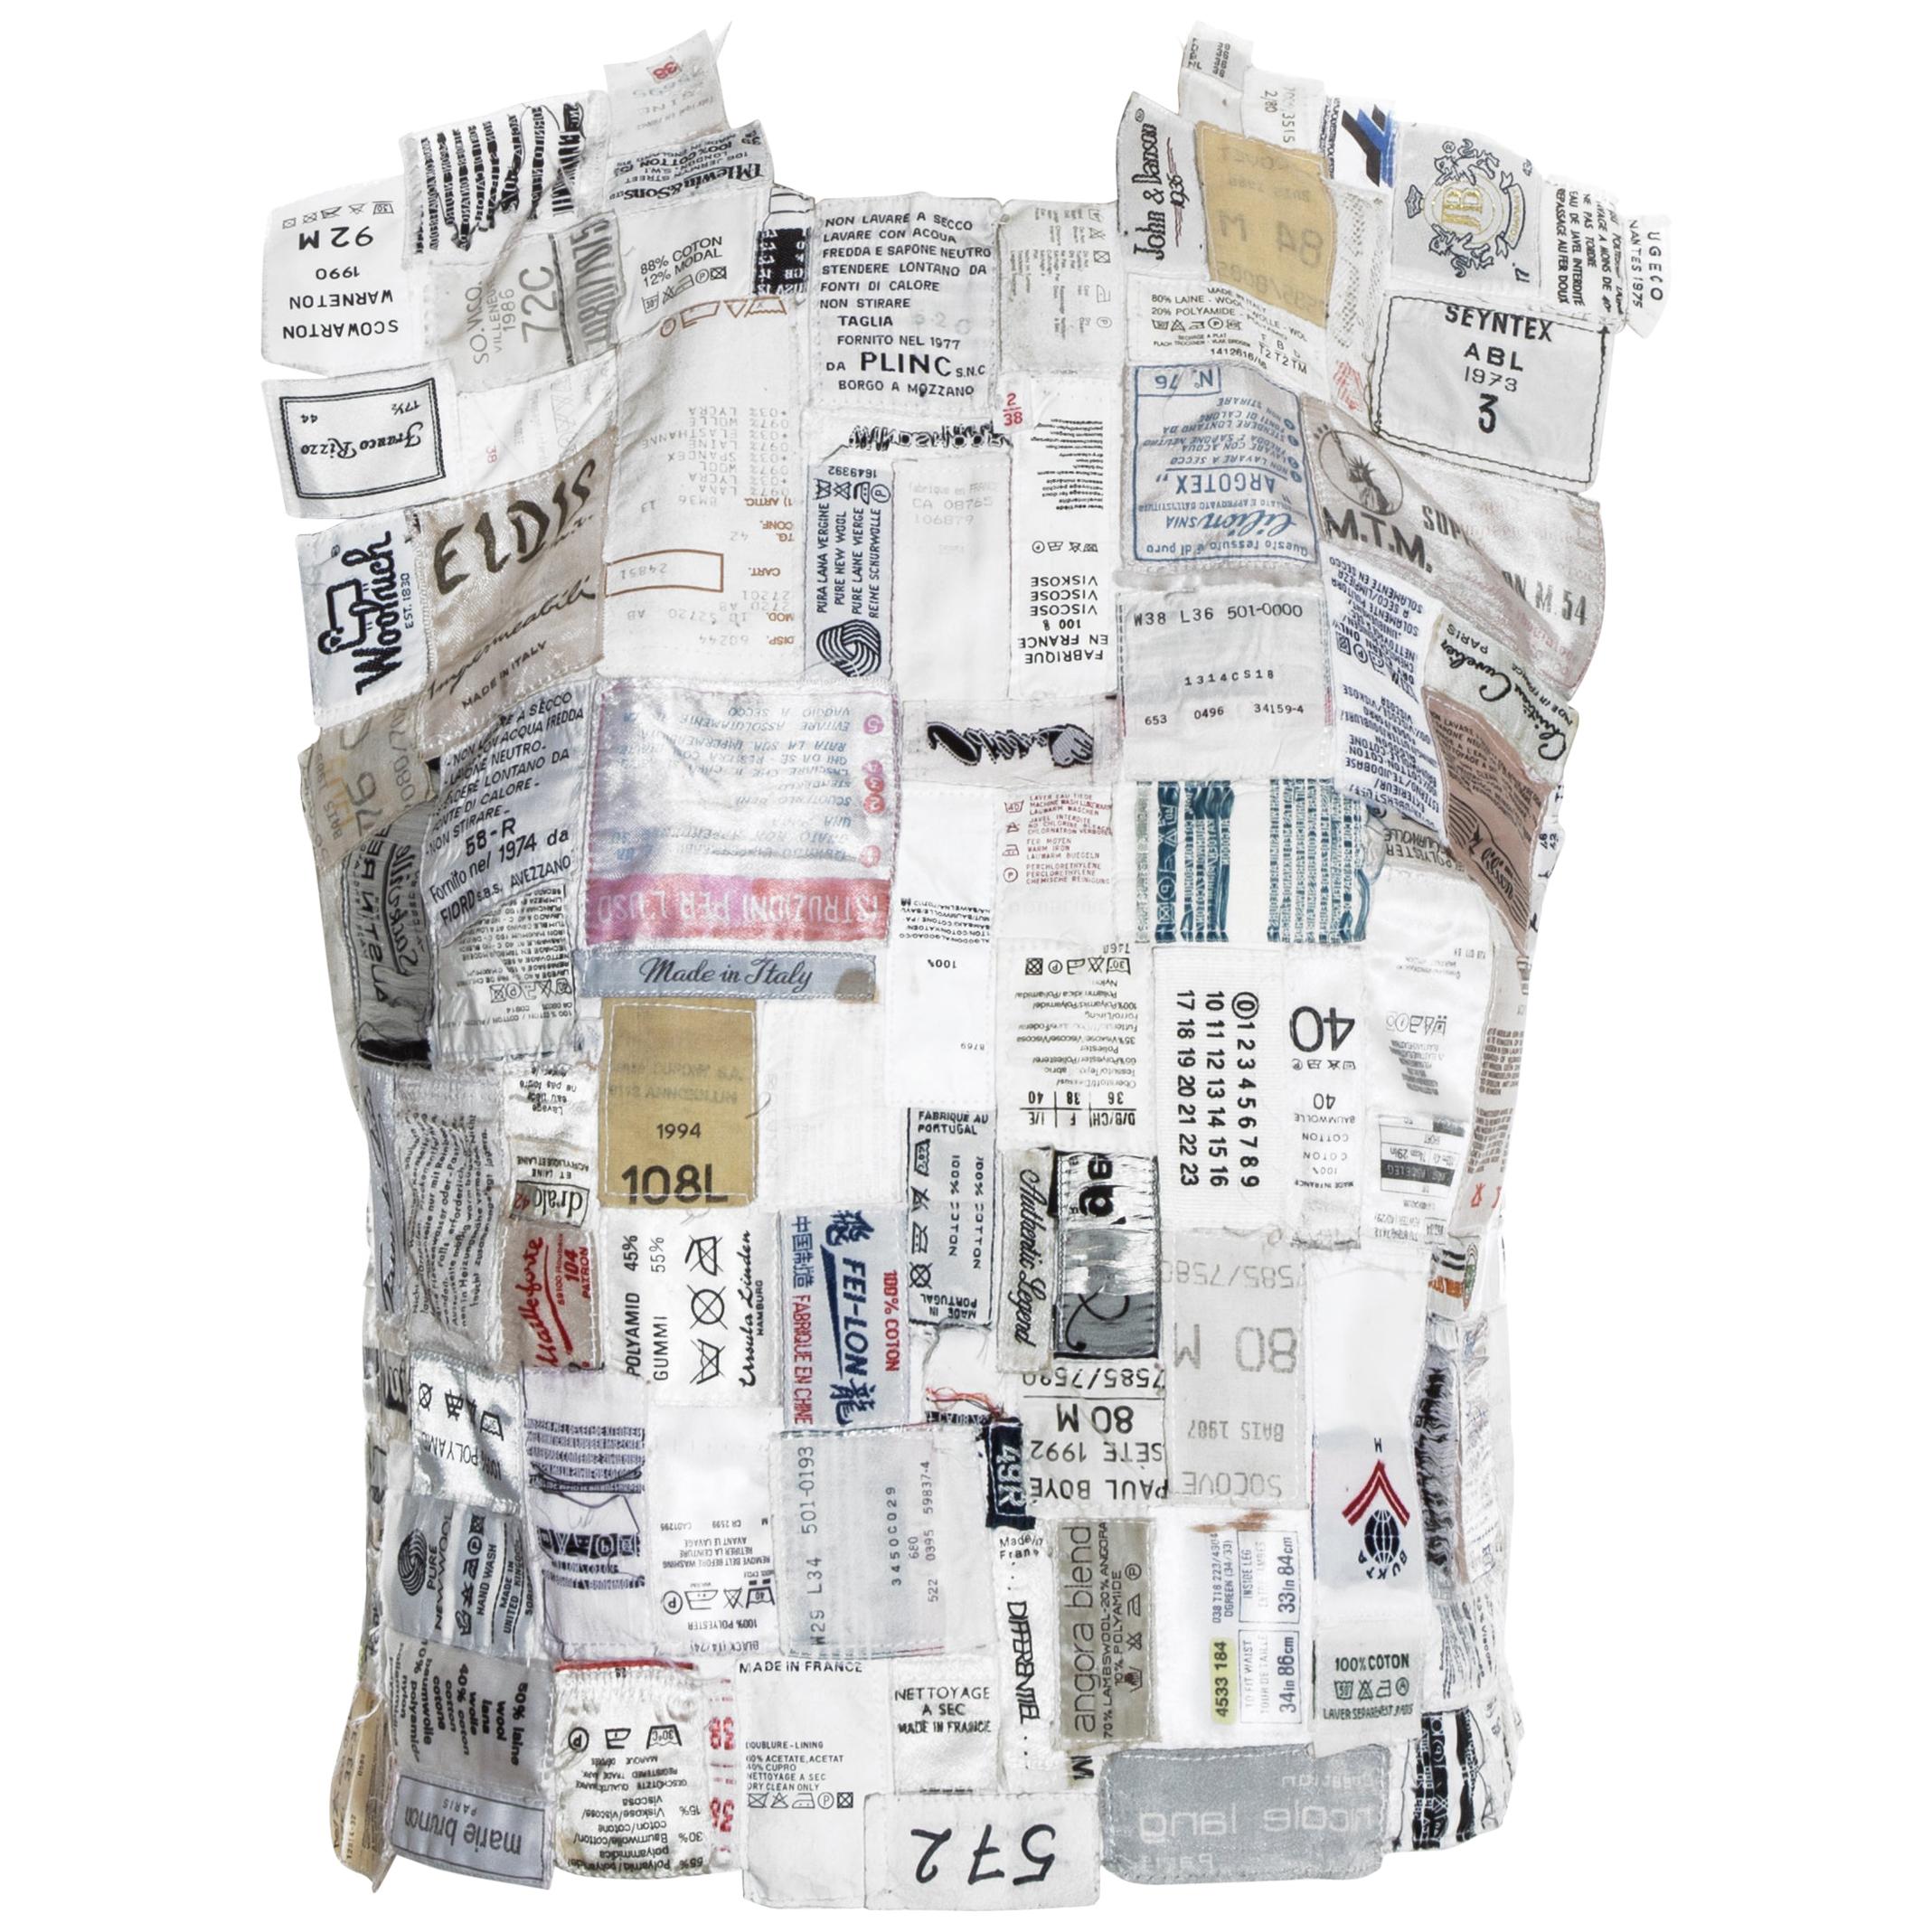 Martin Margiela shirtfront made up of reclaimed vintage labels, ss 2001